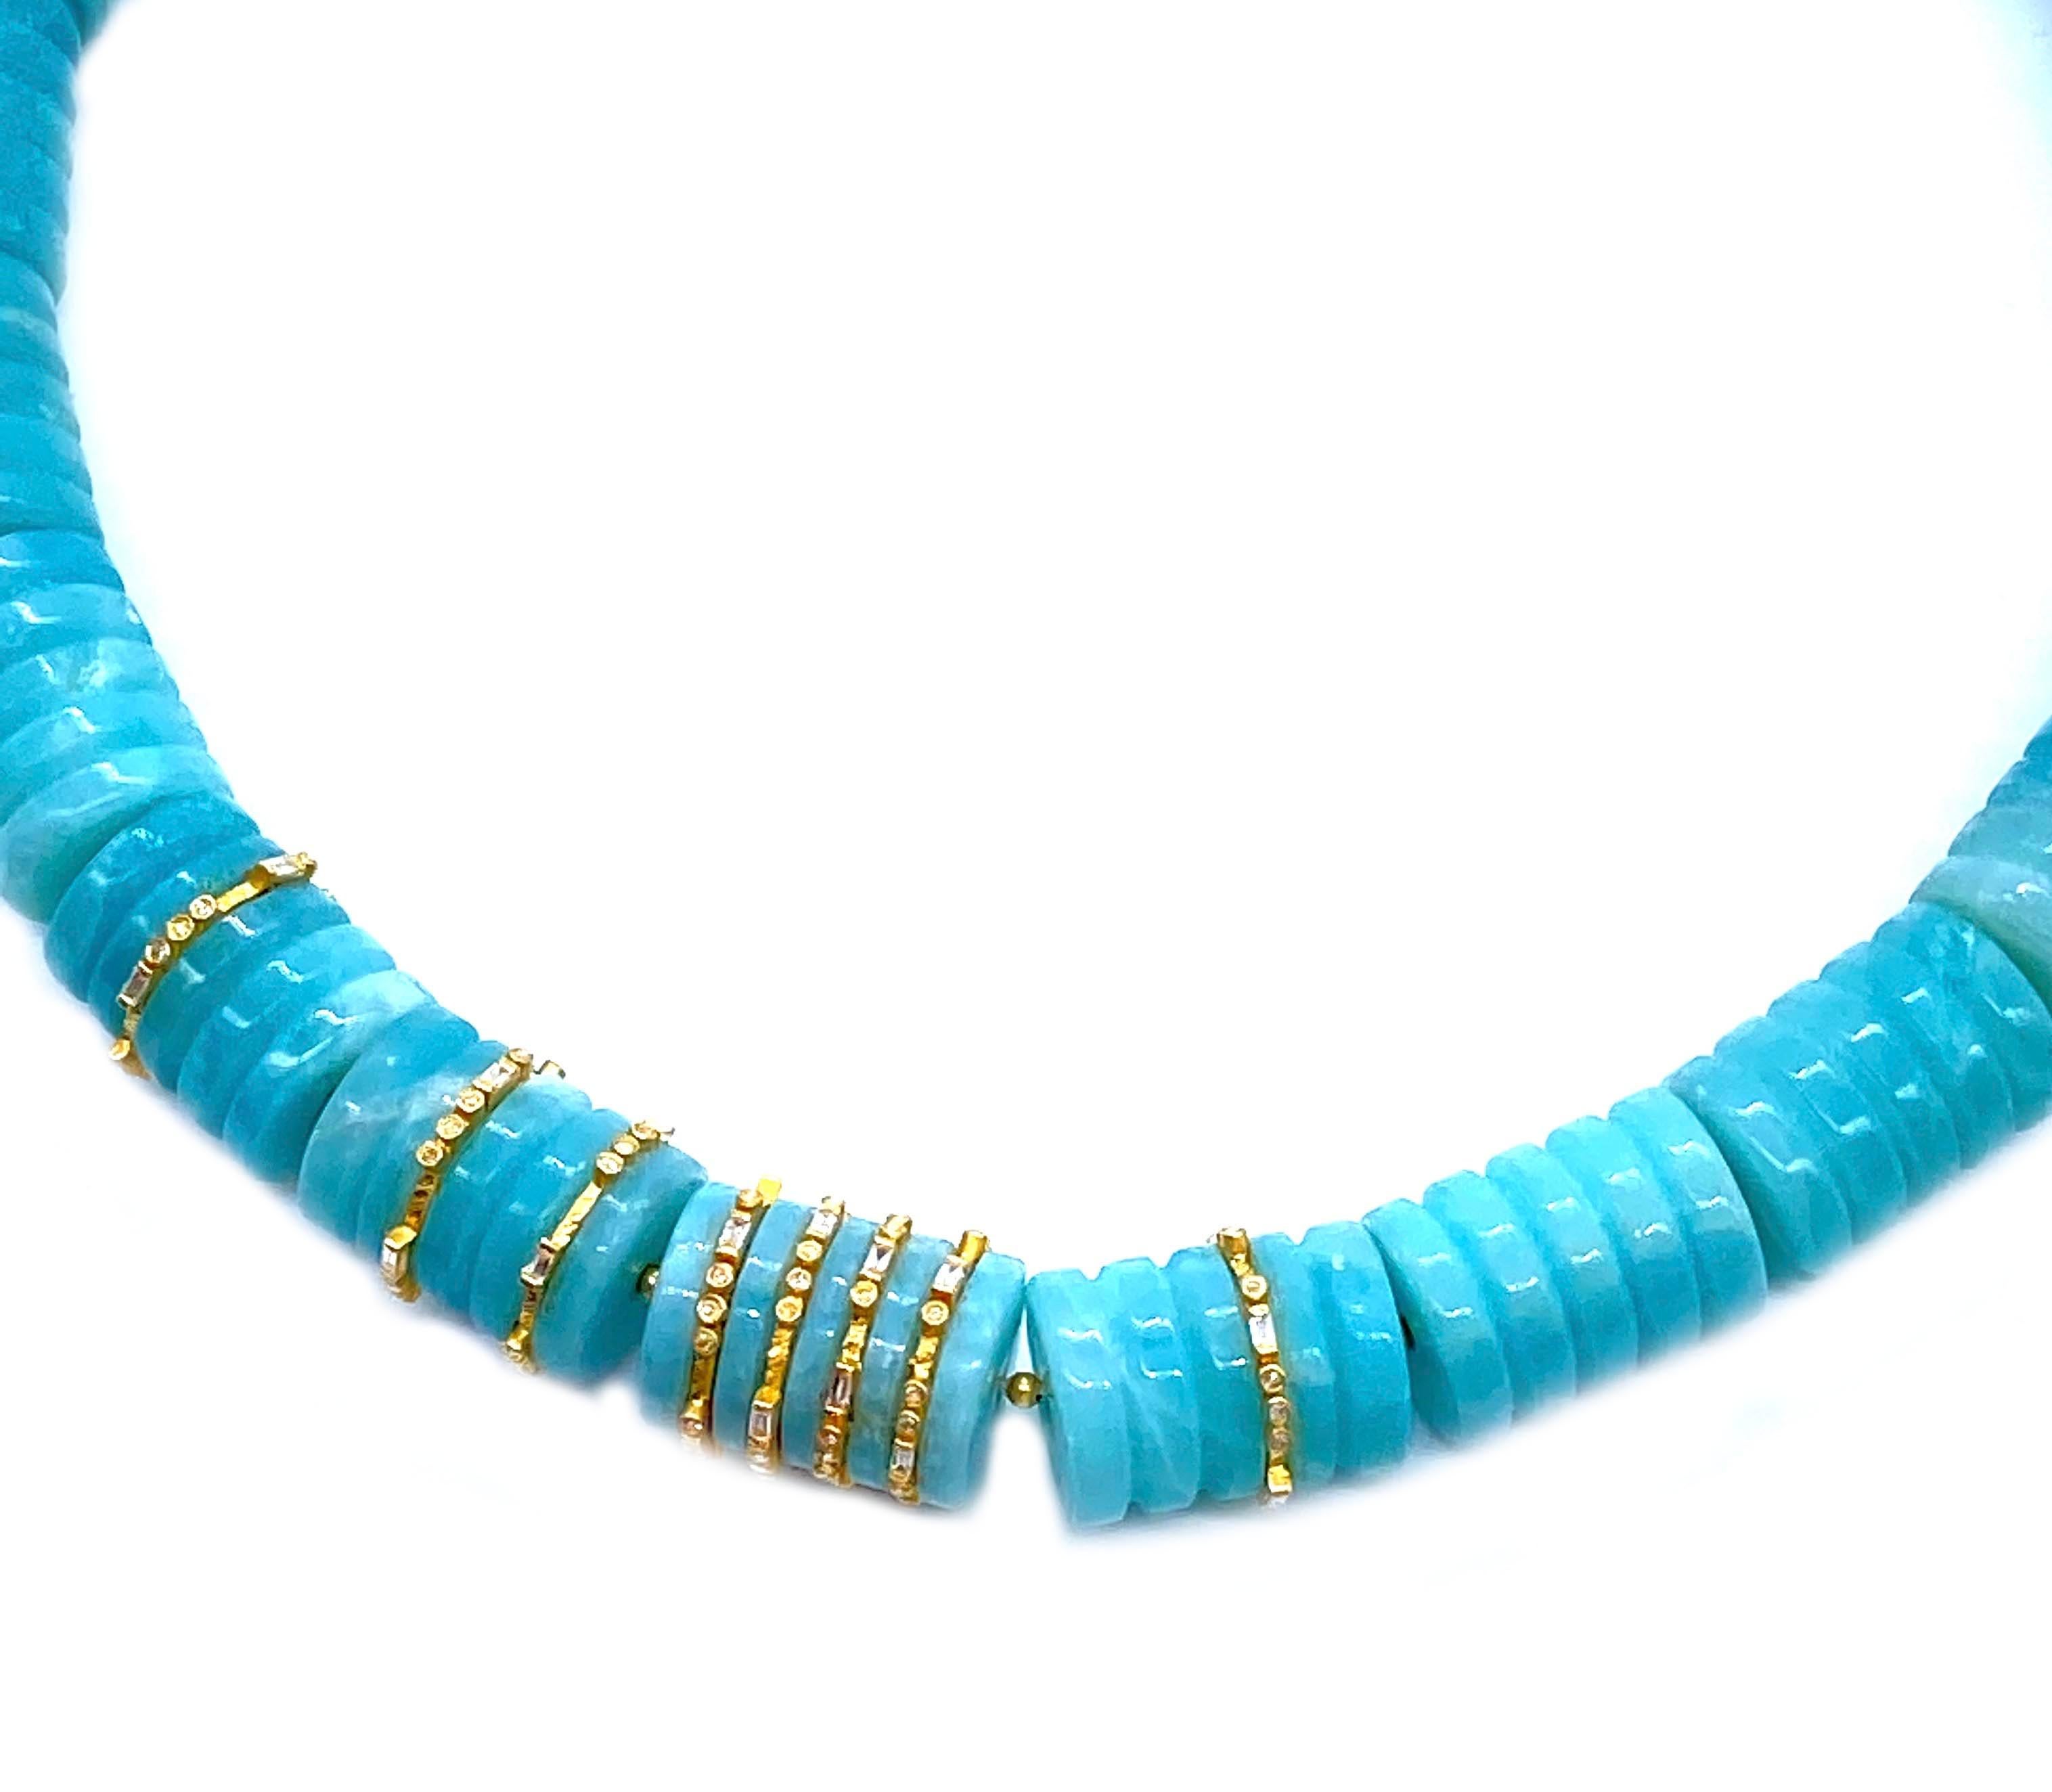 Coomi Aquamarine Beads Necklace from the Affinity Collection is a one of a kind piece. The Affinity Collection represents a pastiche of cultures, fused largely by their attraction to nature’s most inspiring gifts. 

The full-size necklace is made of